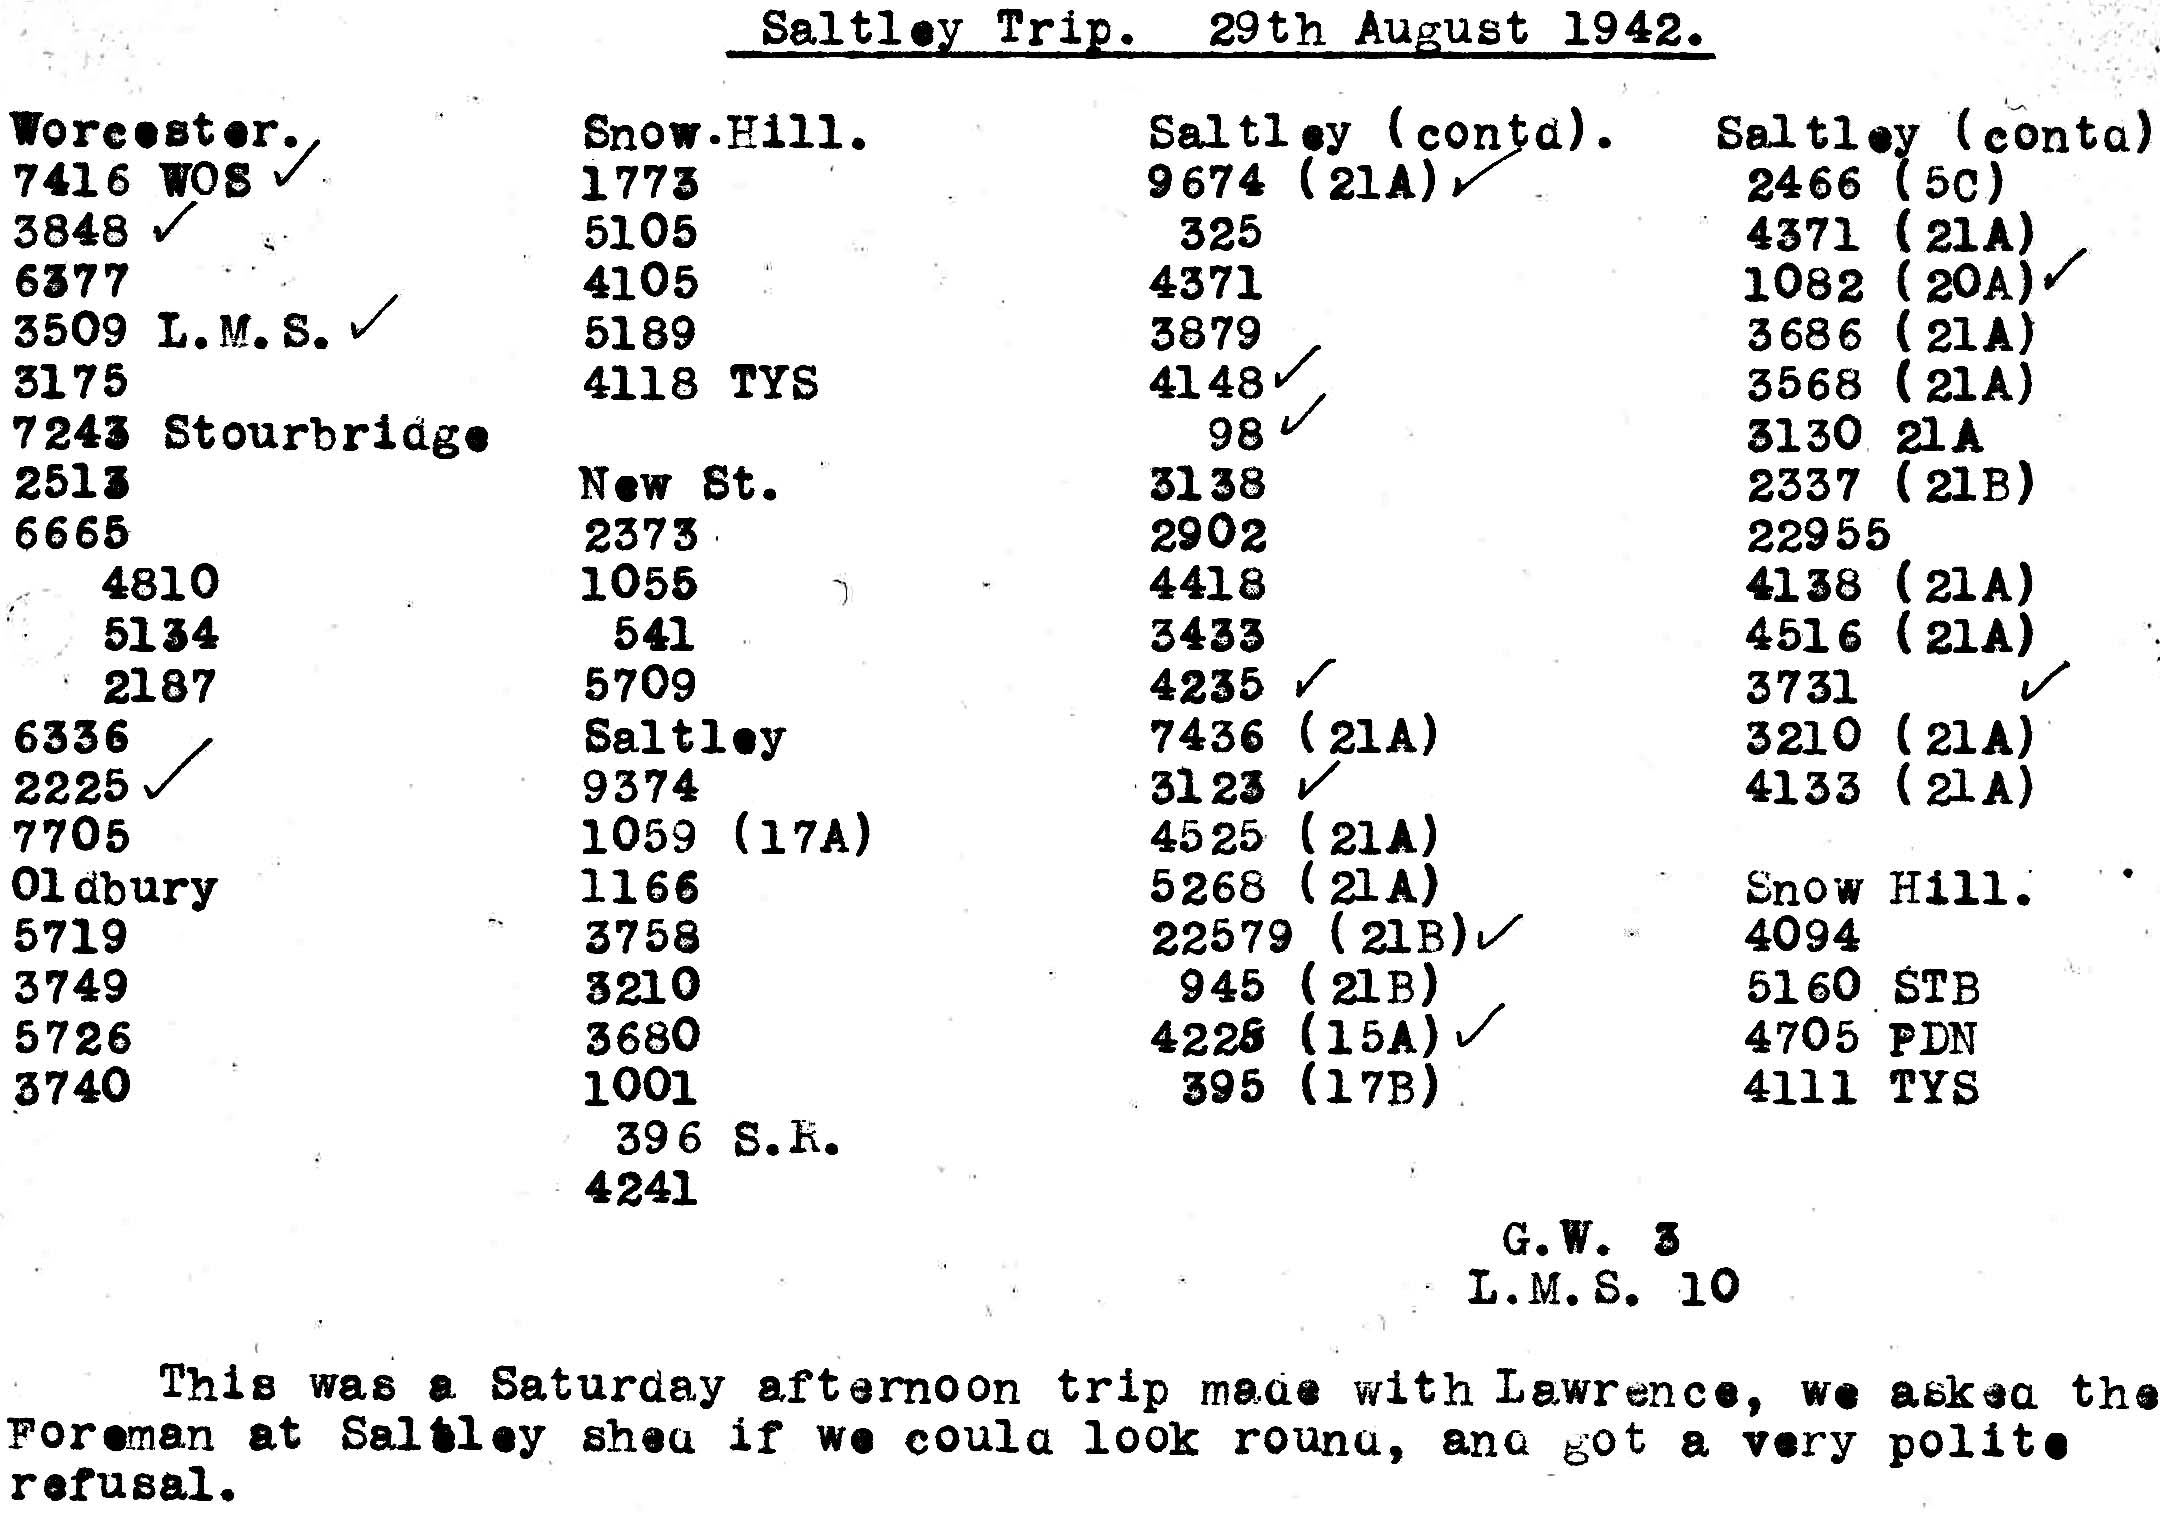 29th August 1942 - Trip to Saltley.